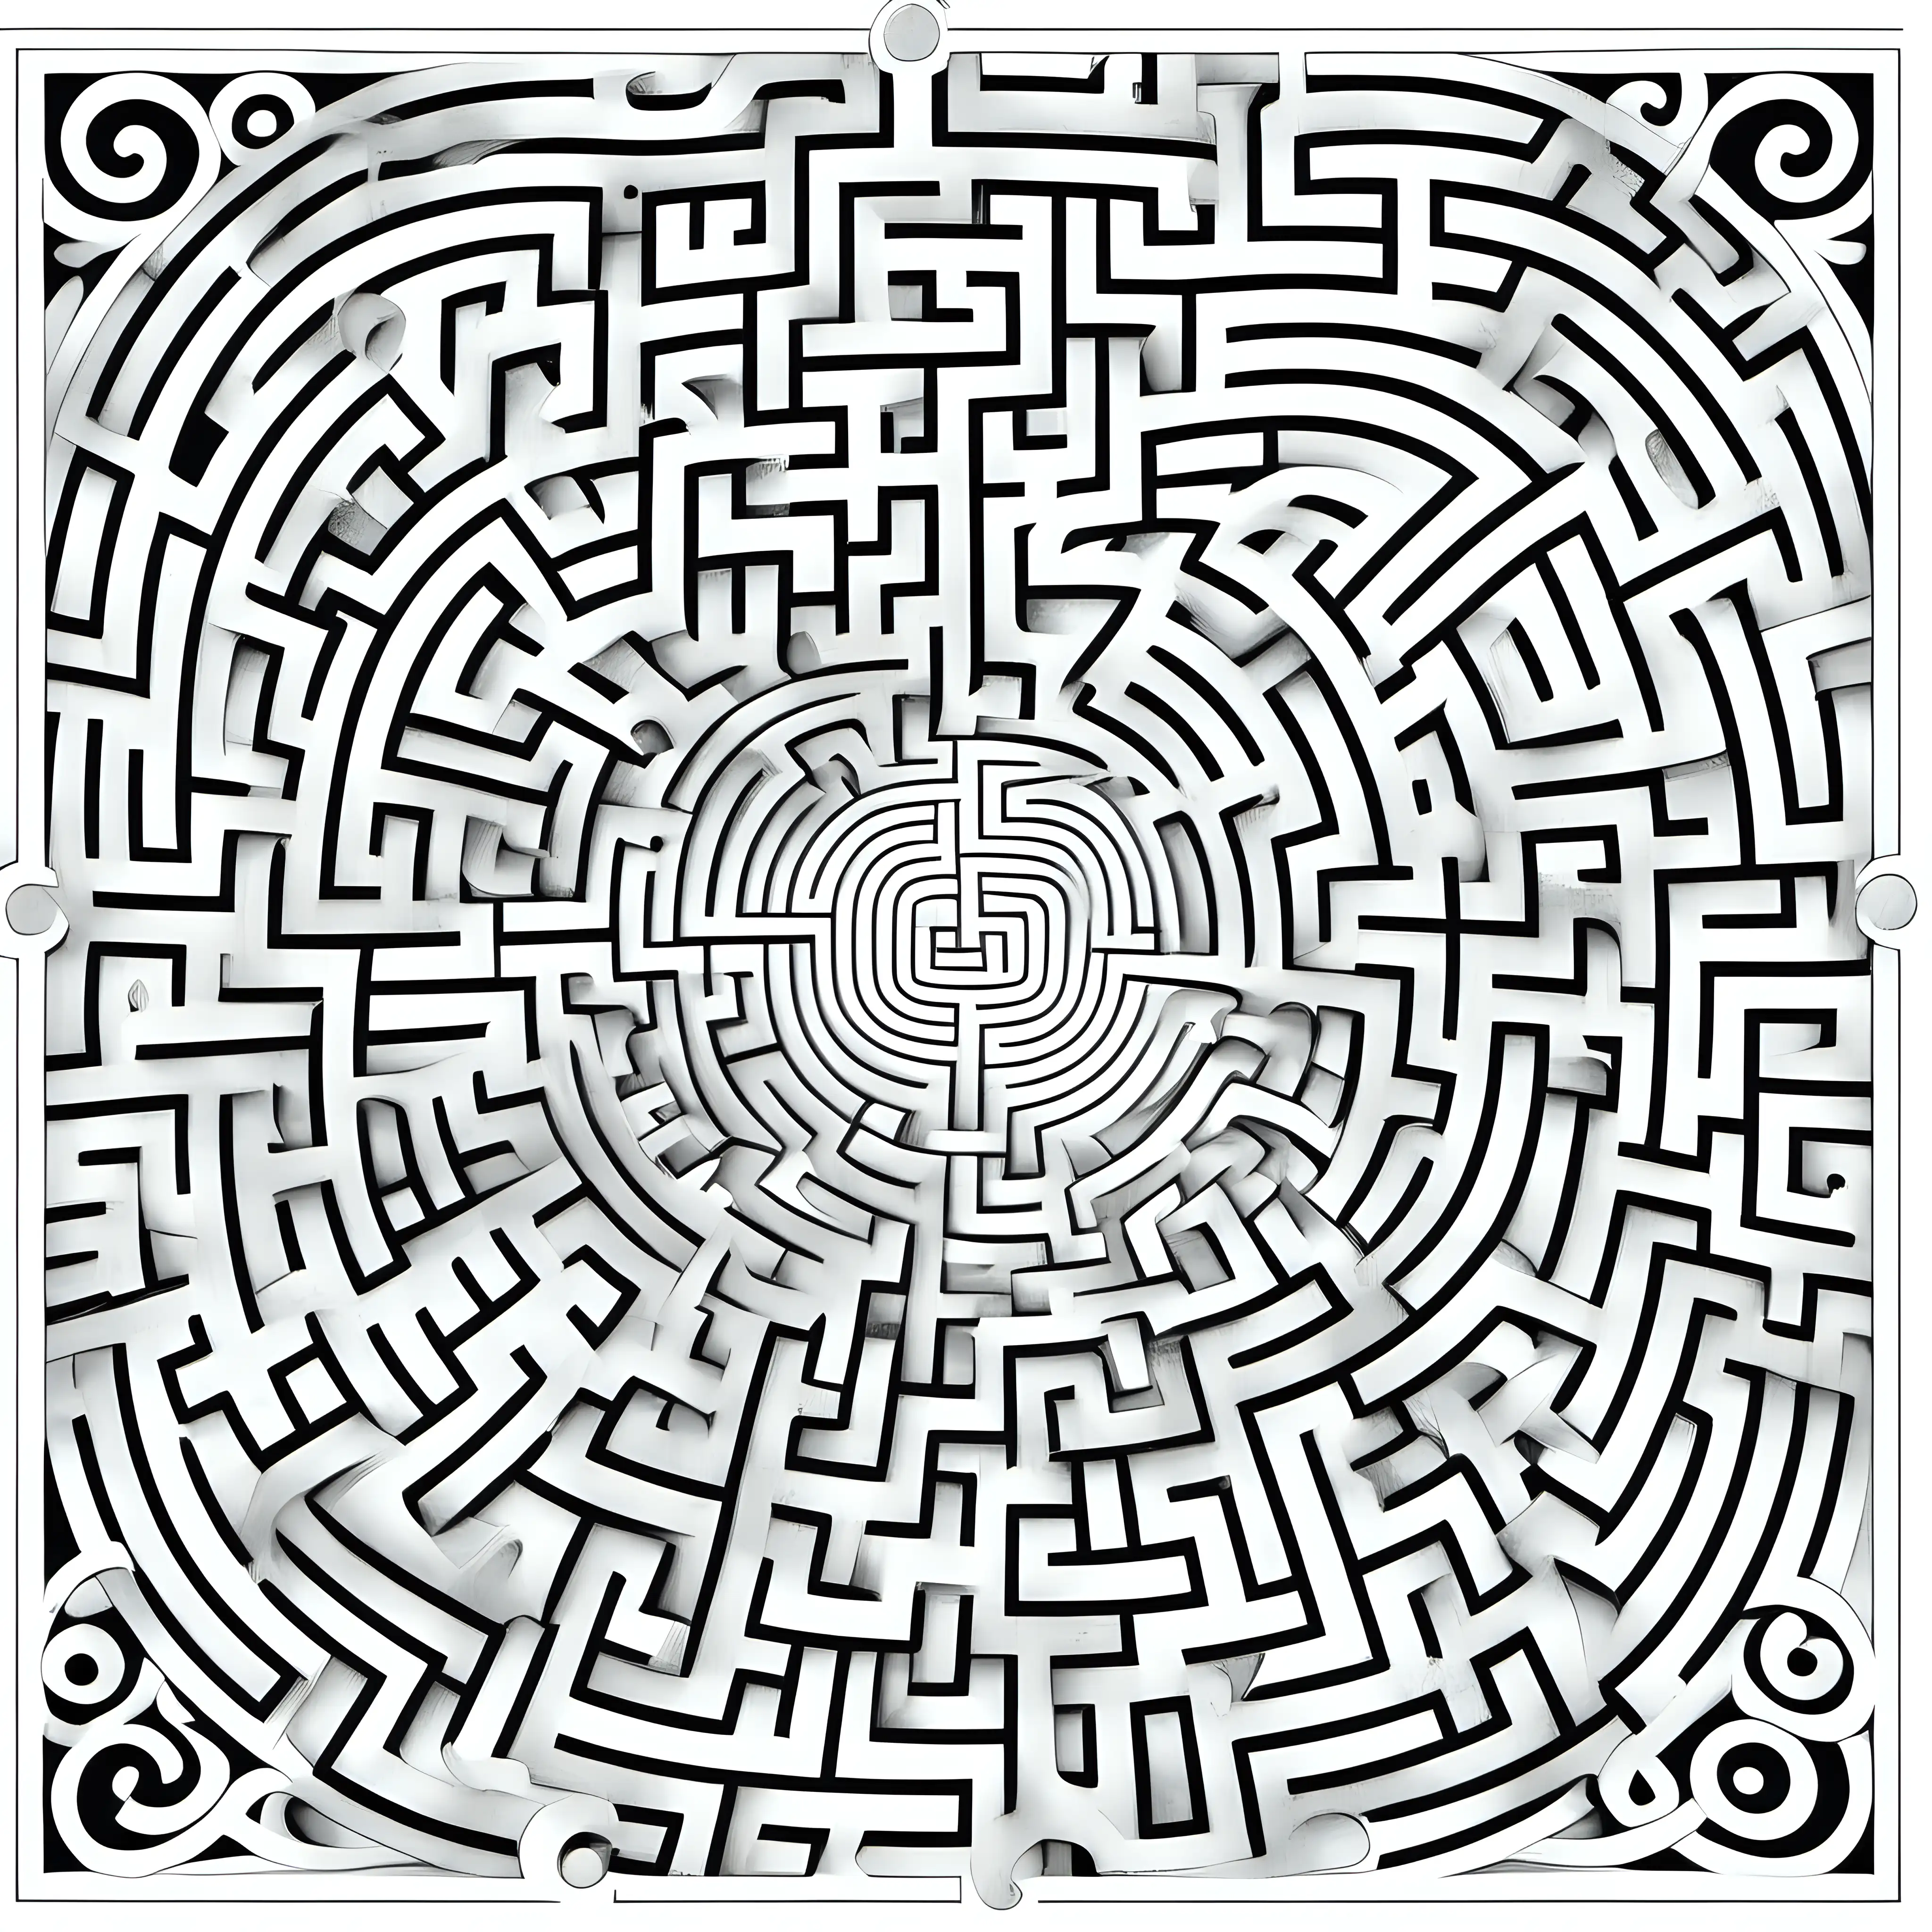 Monochromatic Maze Coloring Book Pages with Varied Patterns